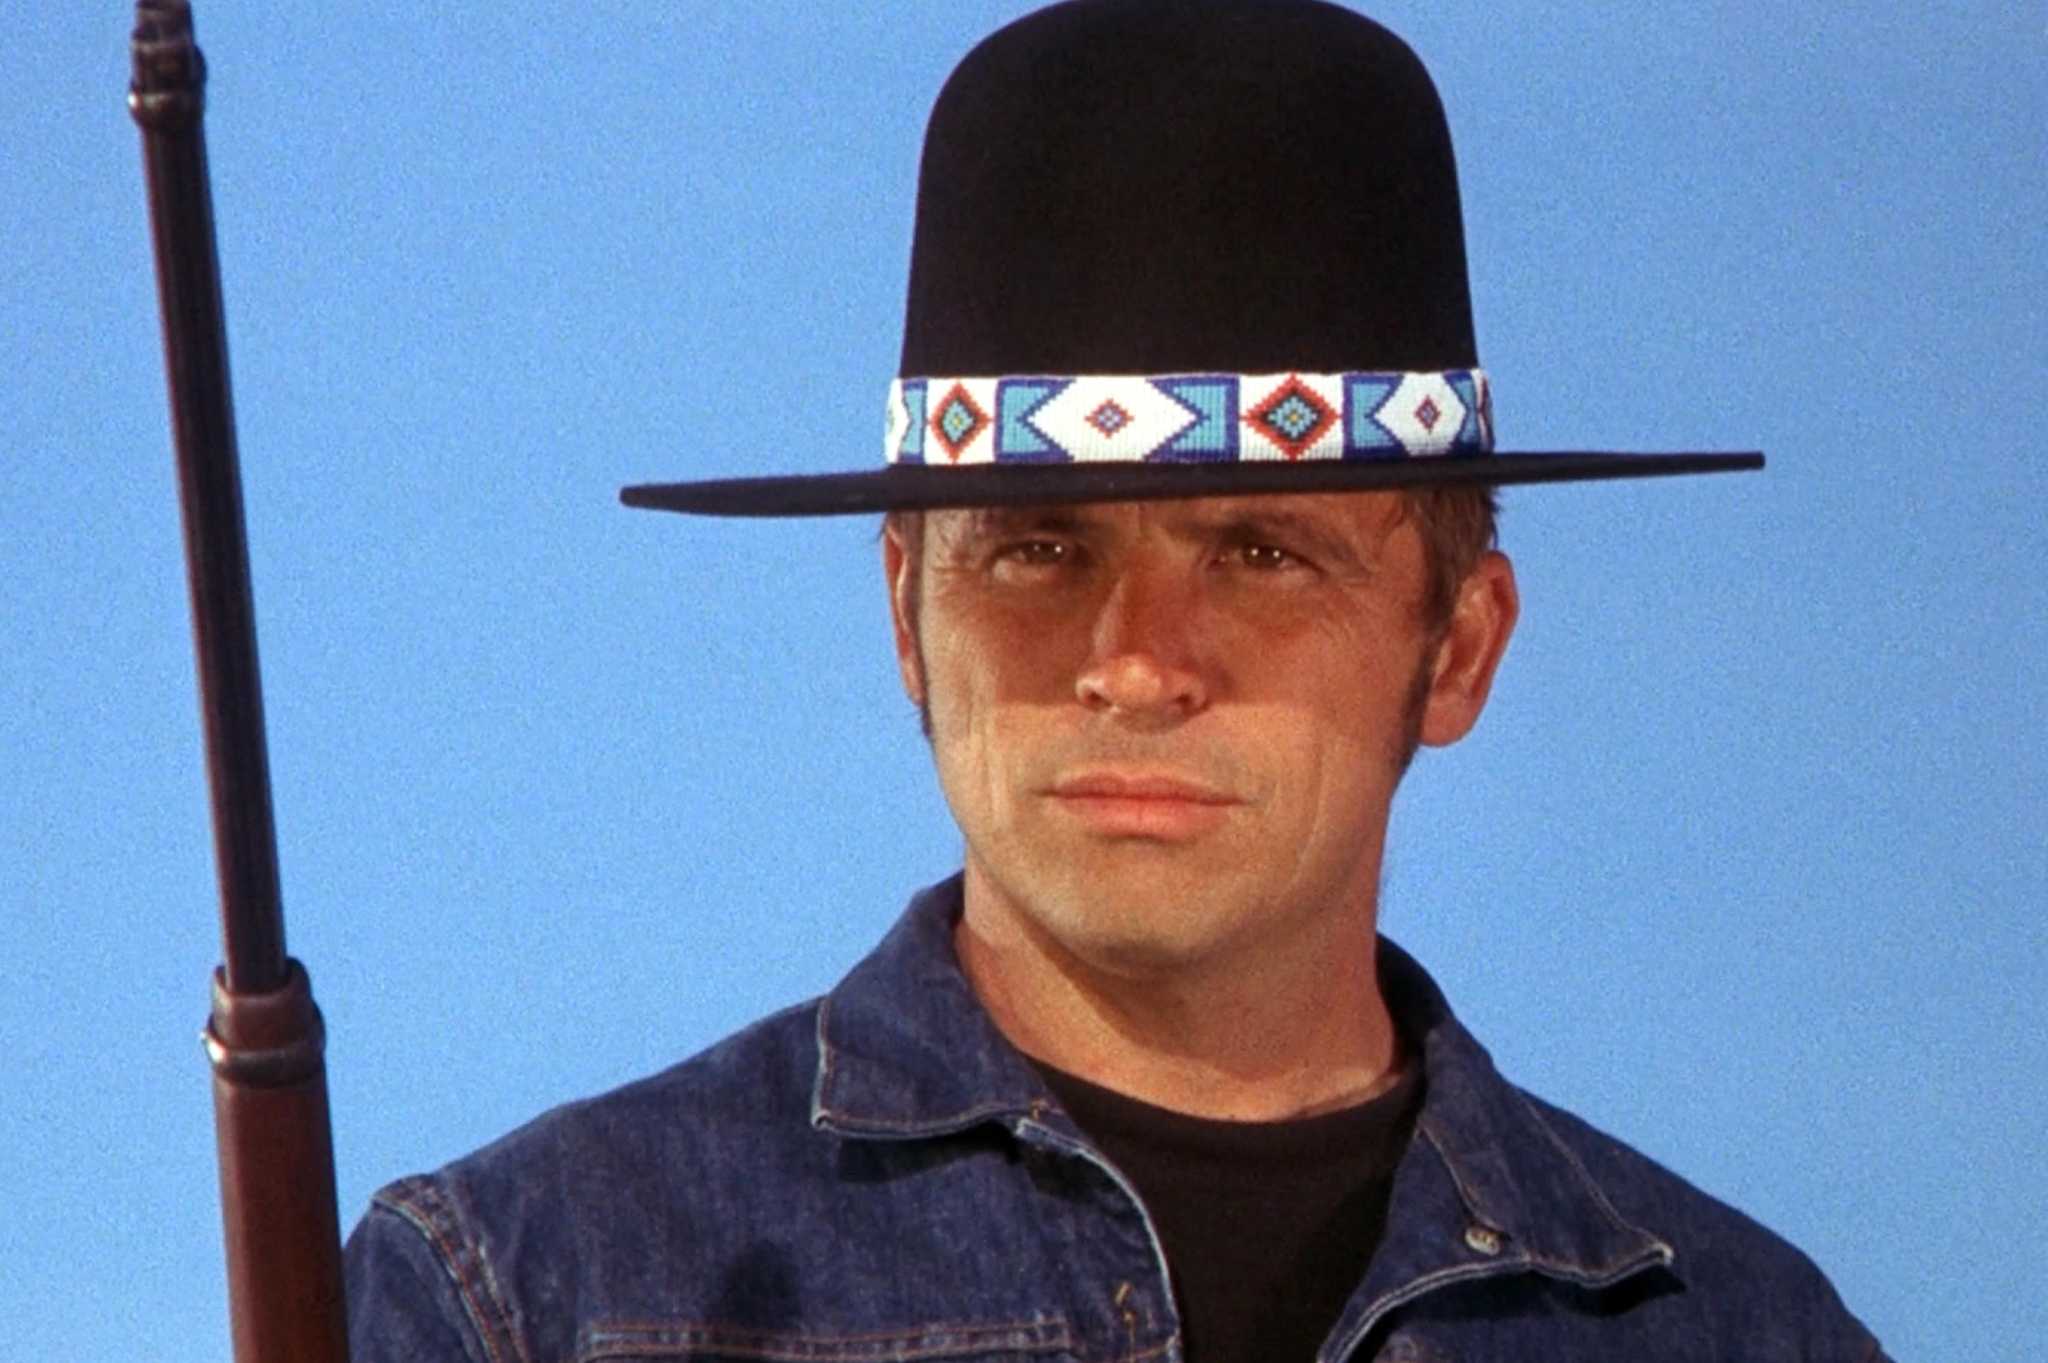 Billy Jack goes berserk again in new collection - SFGate2048 x 1363